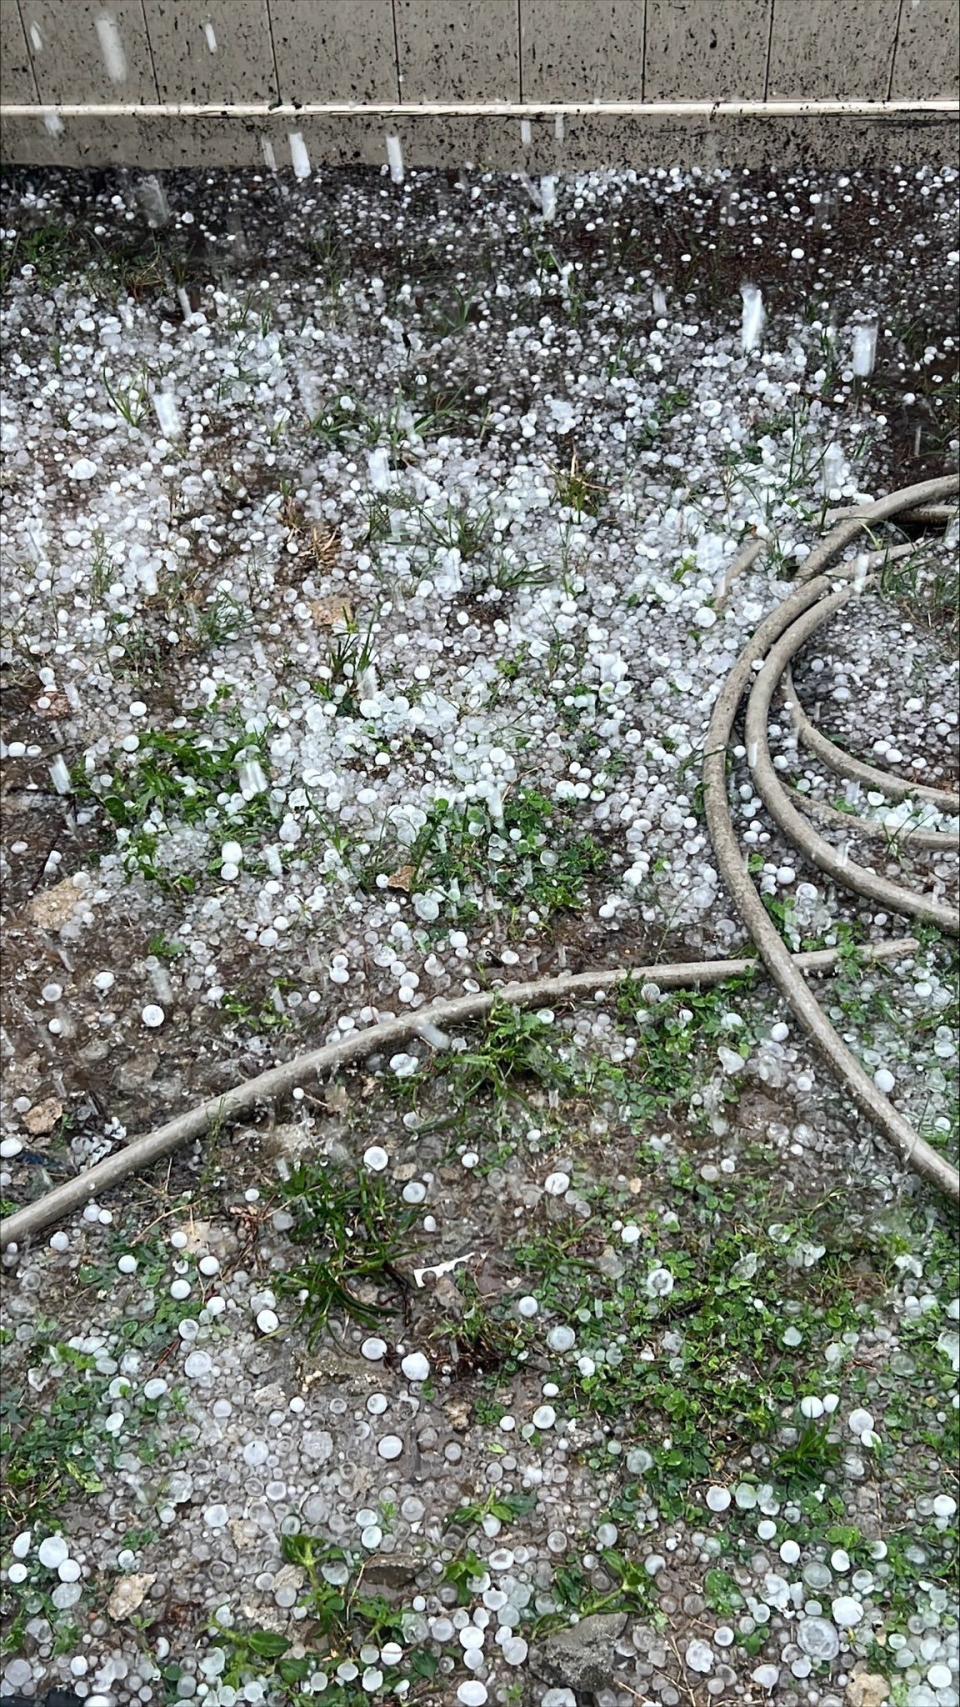 Channel 9 viewer @krys_gearhart sent in these photos of hail in Groveland.